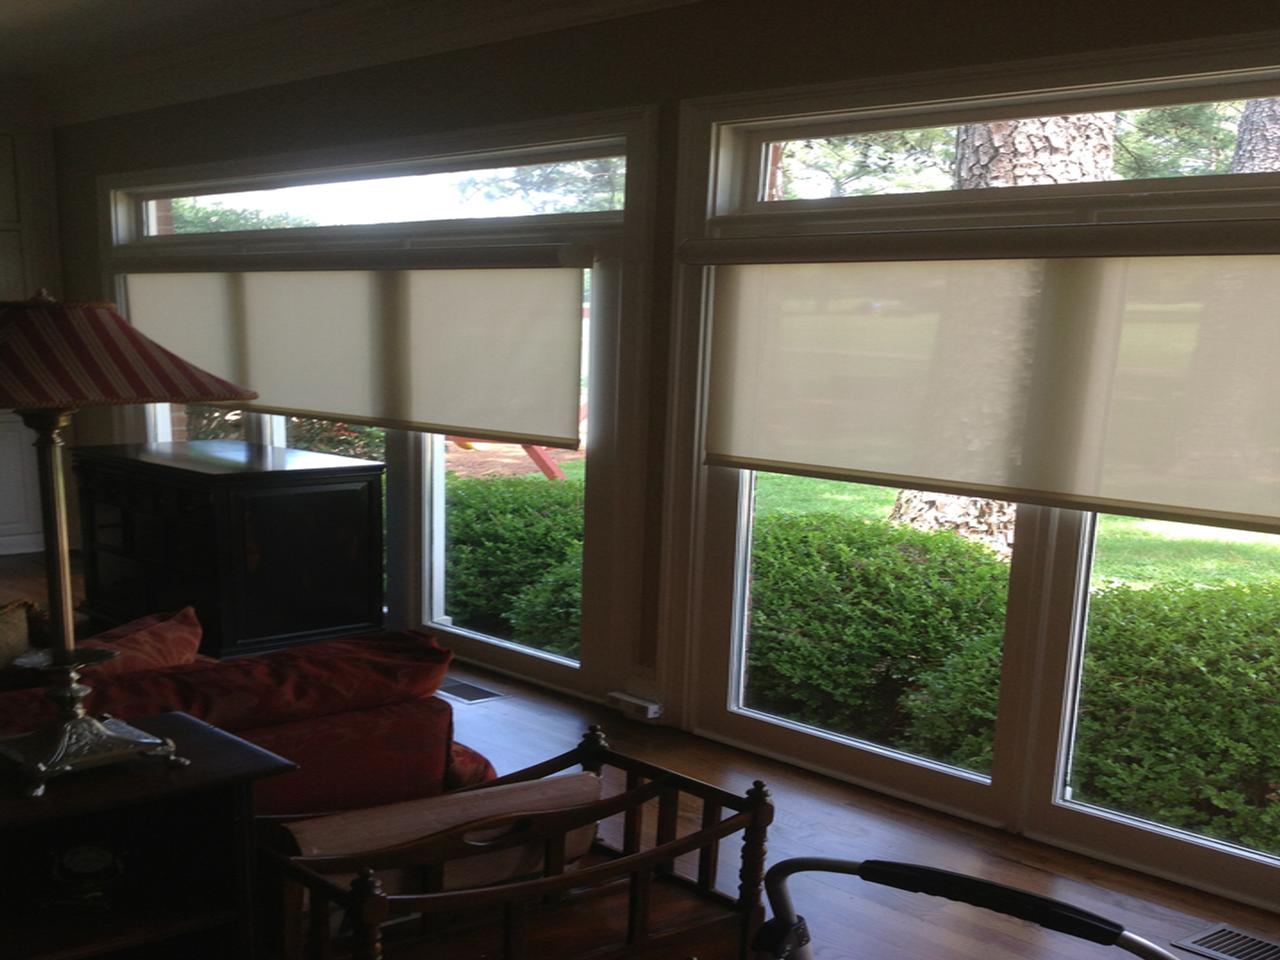 Screen roller shades in living room